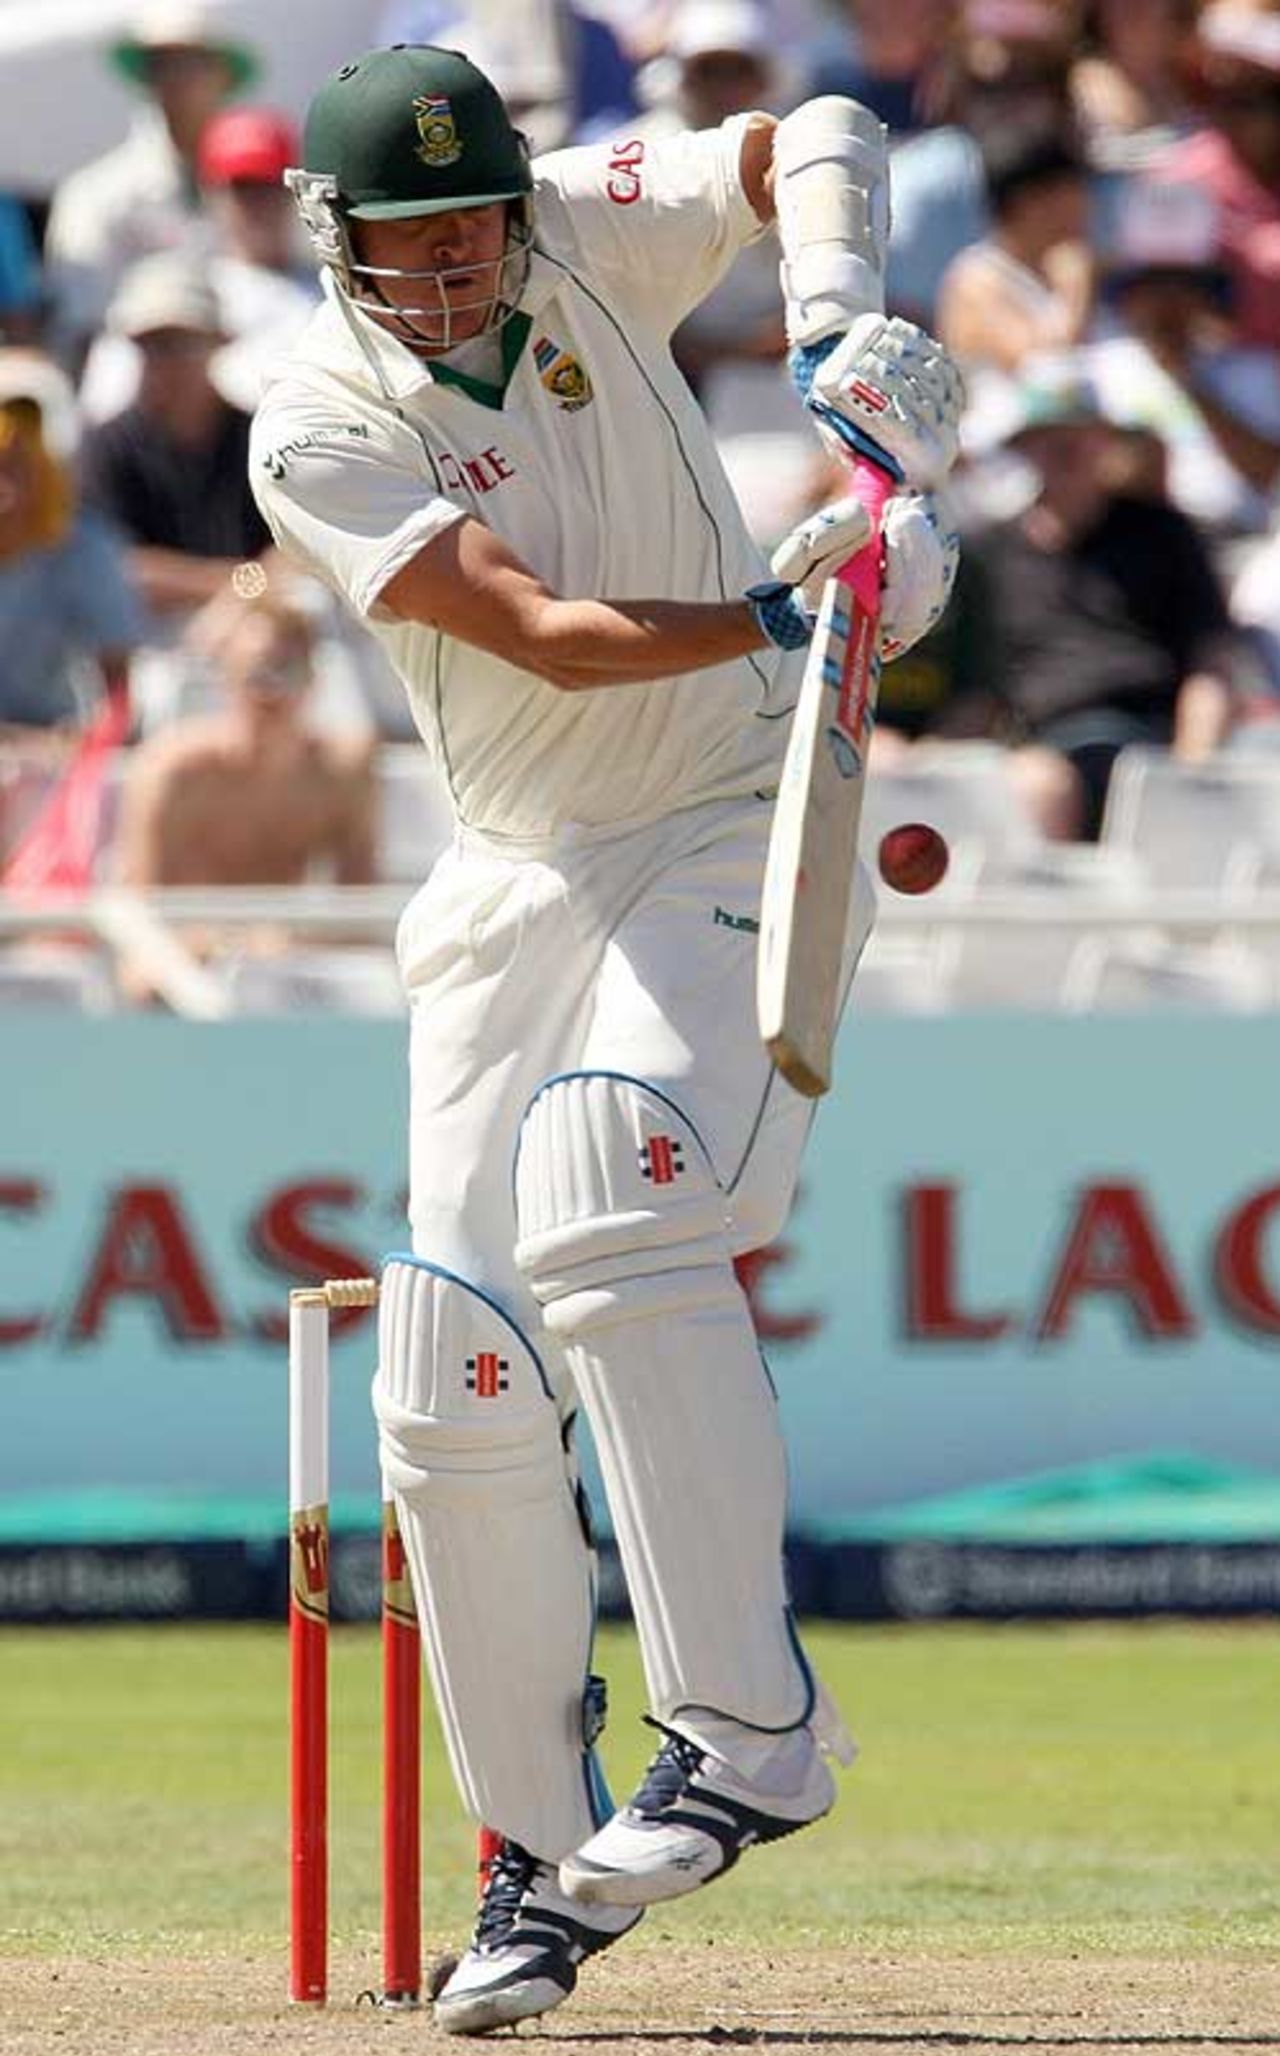 Paul Harris chipped in with 27 to get the total to 651, South Africa v Australia, 3rd Test, 3rd day, Cape Town, March 21, 2009